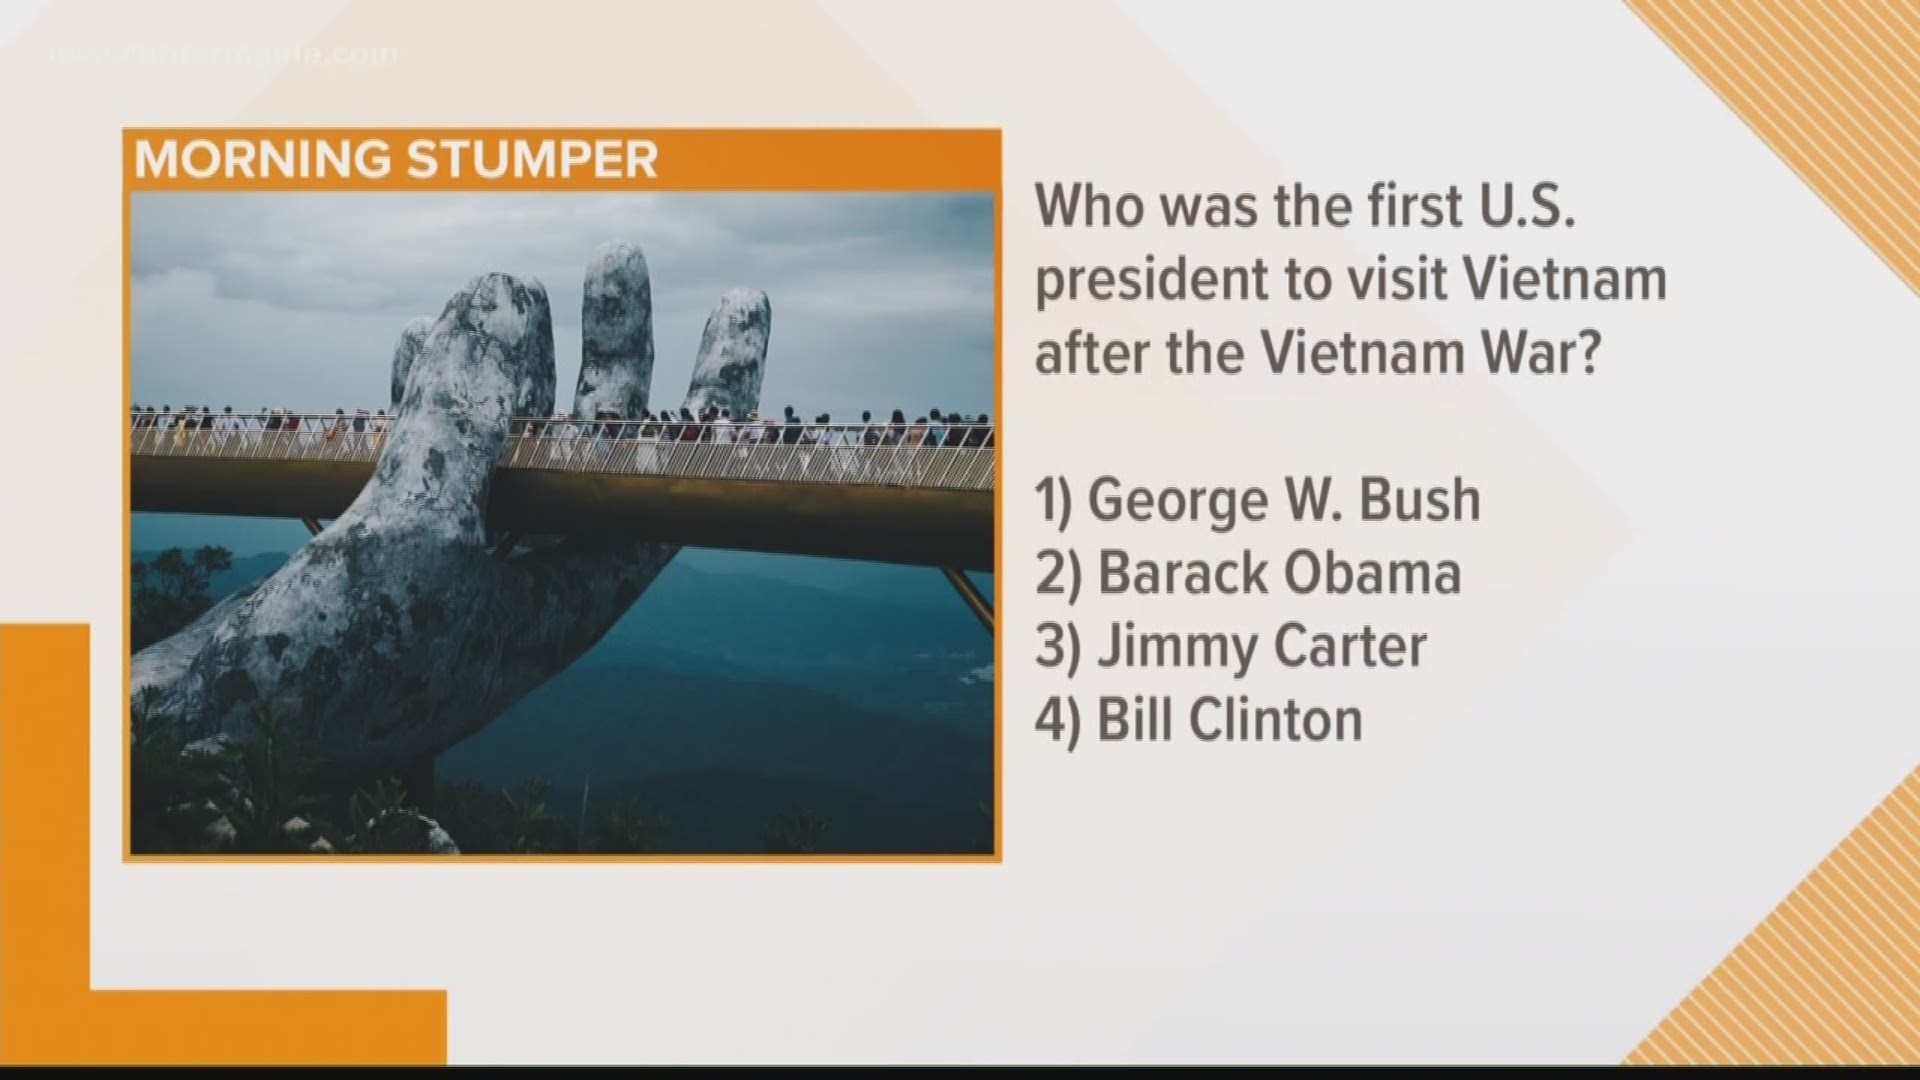 Well it was on this day in a particular year that a U.S. President visited Vietnam for the first time since the end of the Vietnam War. Our question today is... 
Who was that president?